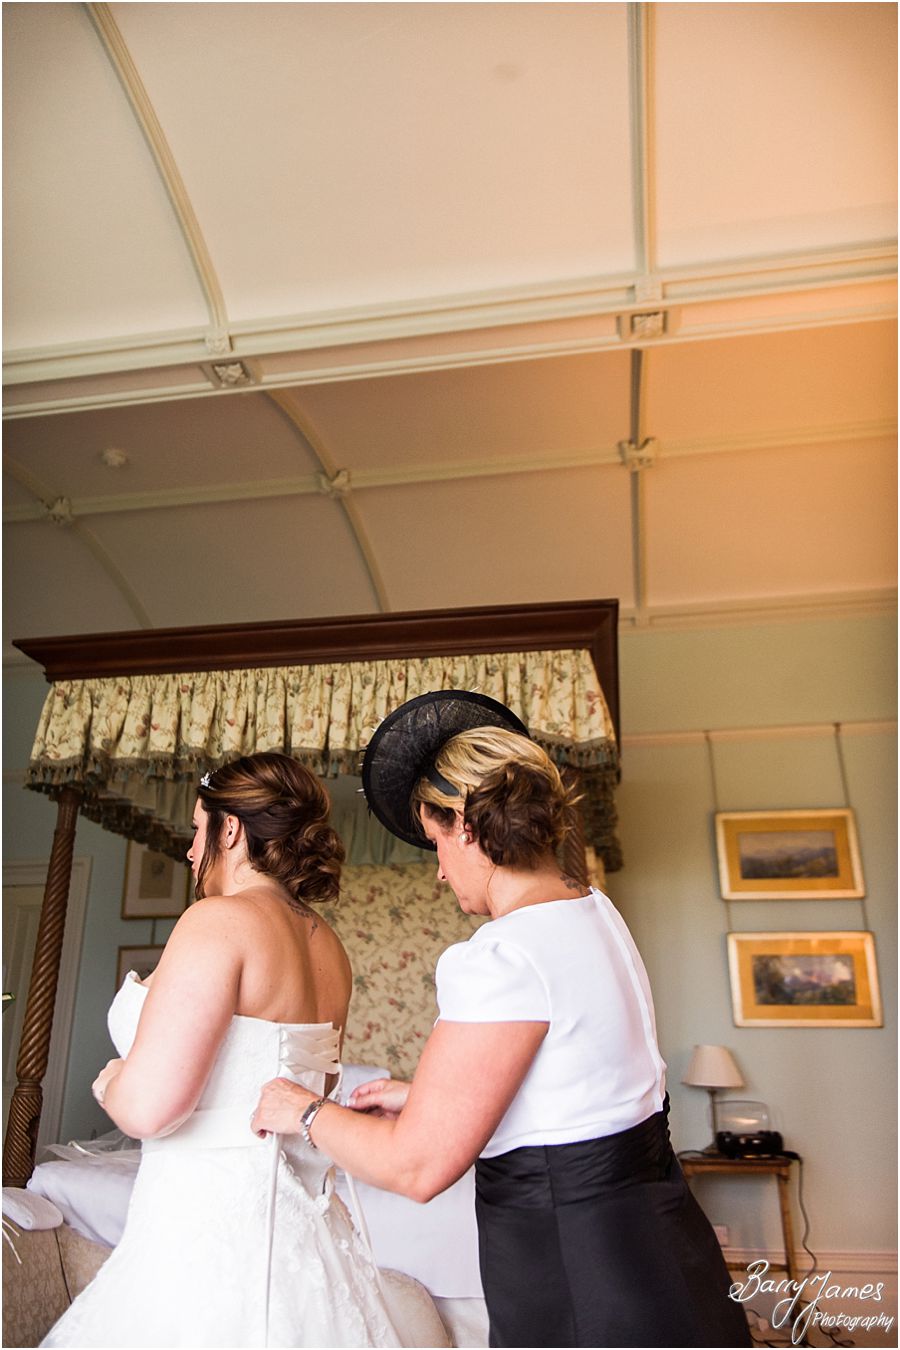 Candid photography of Bride getting ready for the wedding in her beautiful gown at Heath House in Tean by Award Winning Stoke-on-Trent Wedding Photographer Barry James